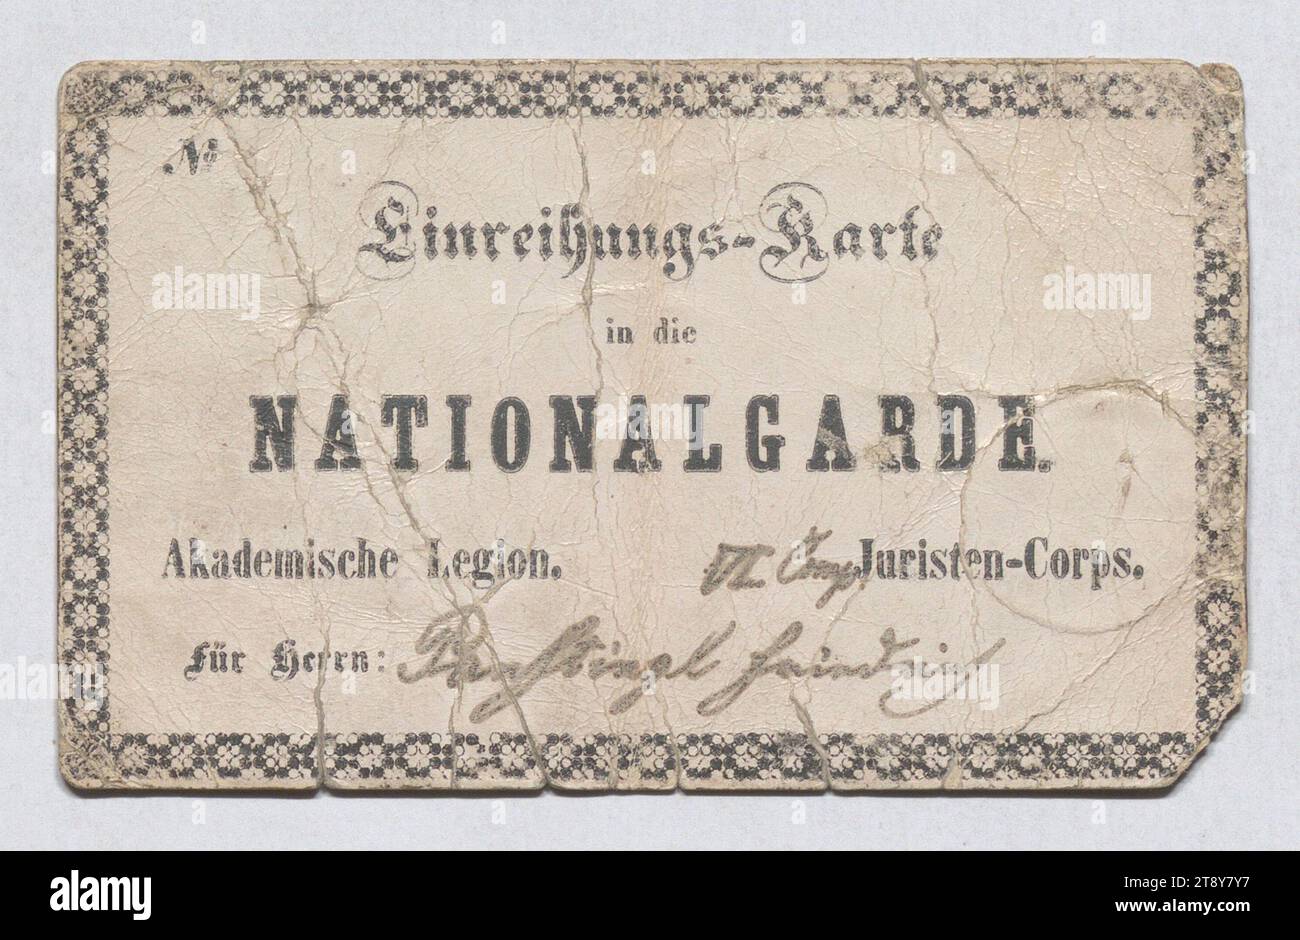 Enlistment card in the National Guard, Academic Legion, VI. Comp., Juristen-Corps, for Friedrich Panstingl, Unknown, 1848, cardboard, print and handwriting, height 7.1 cm, width 11.5 cm, military, universities, civic, revolutions of 1848, 1849, communication (military), The Vienna Collection Stock Photo